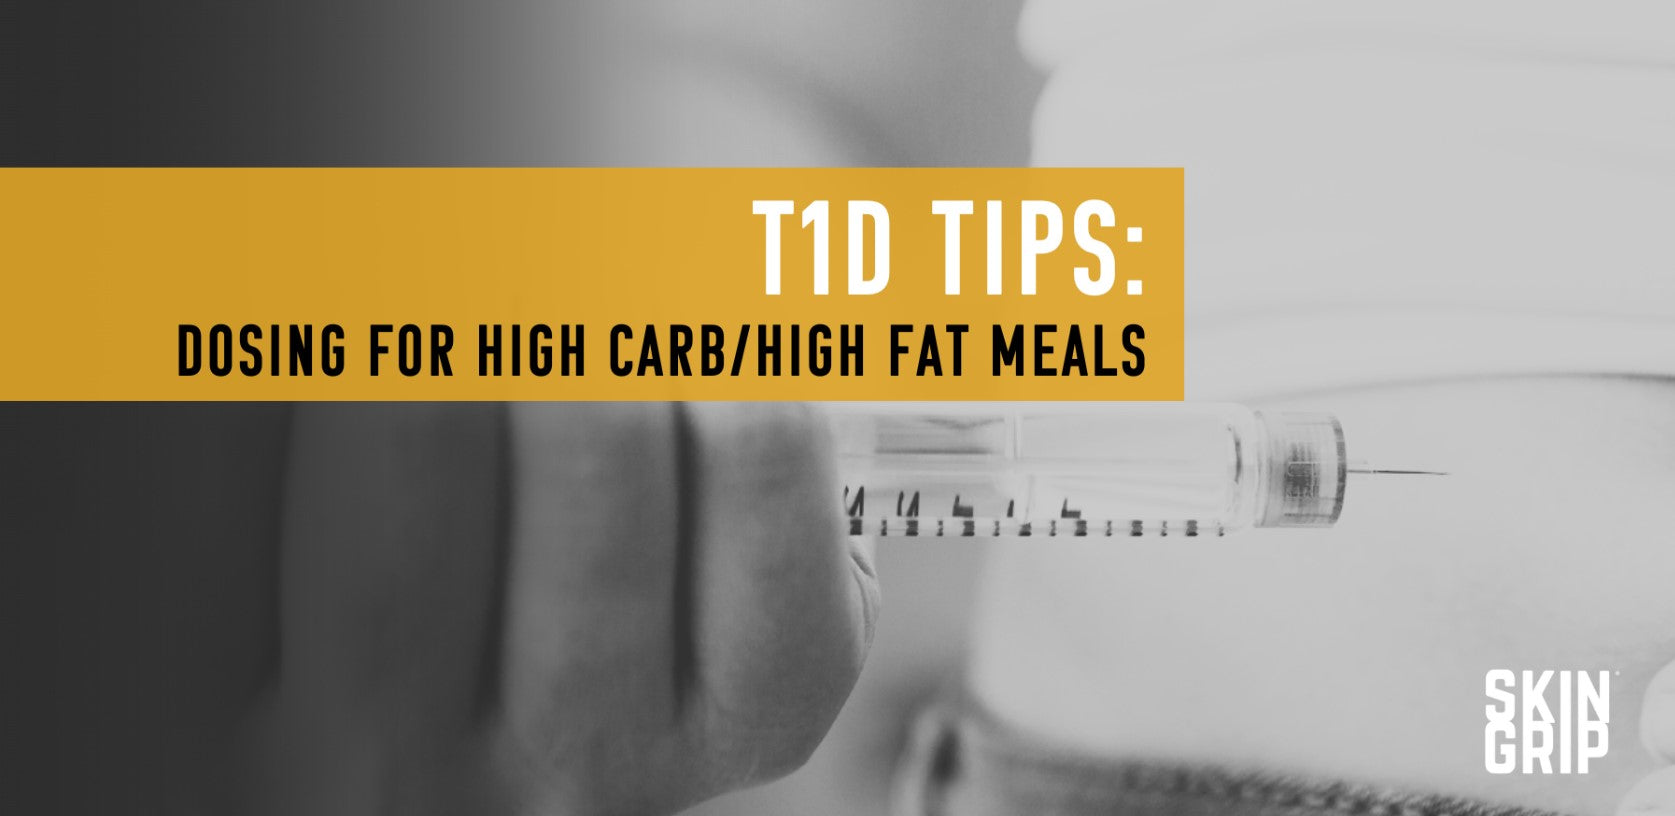 T1D Tips: Dosing for High Carb/High Fat Meals 